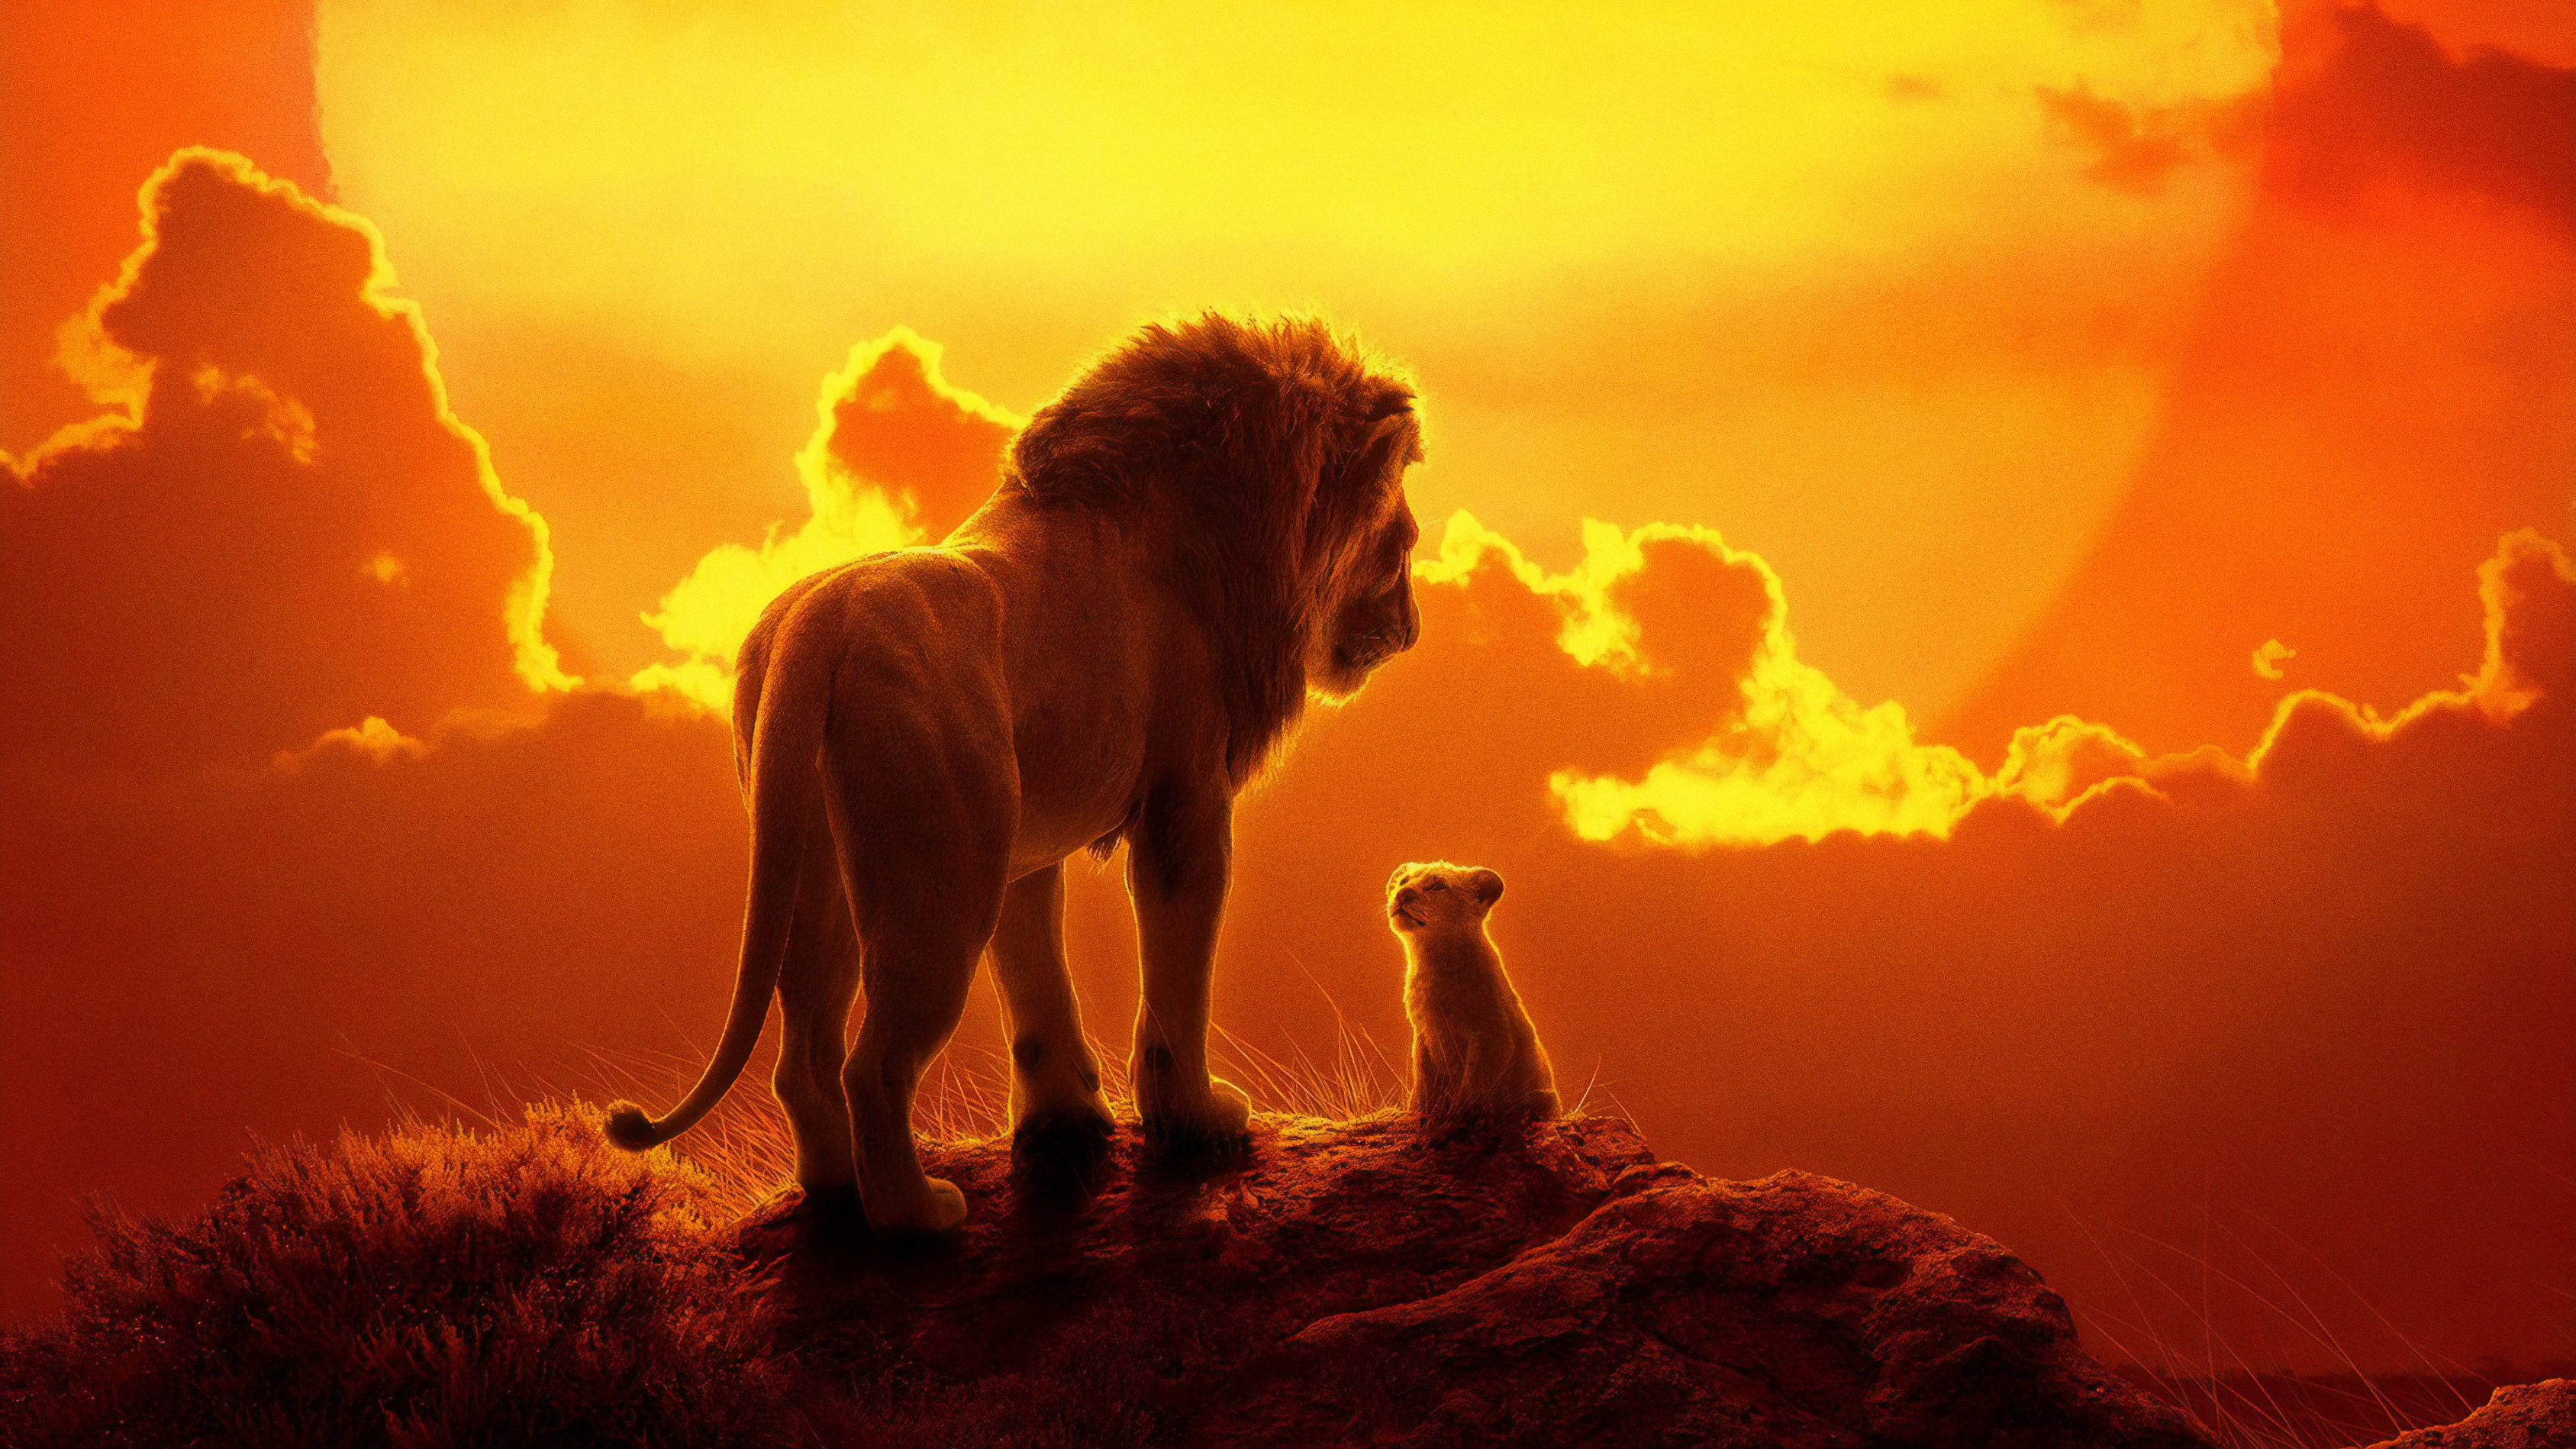 The Lion King 2019 Wallpapers